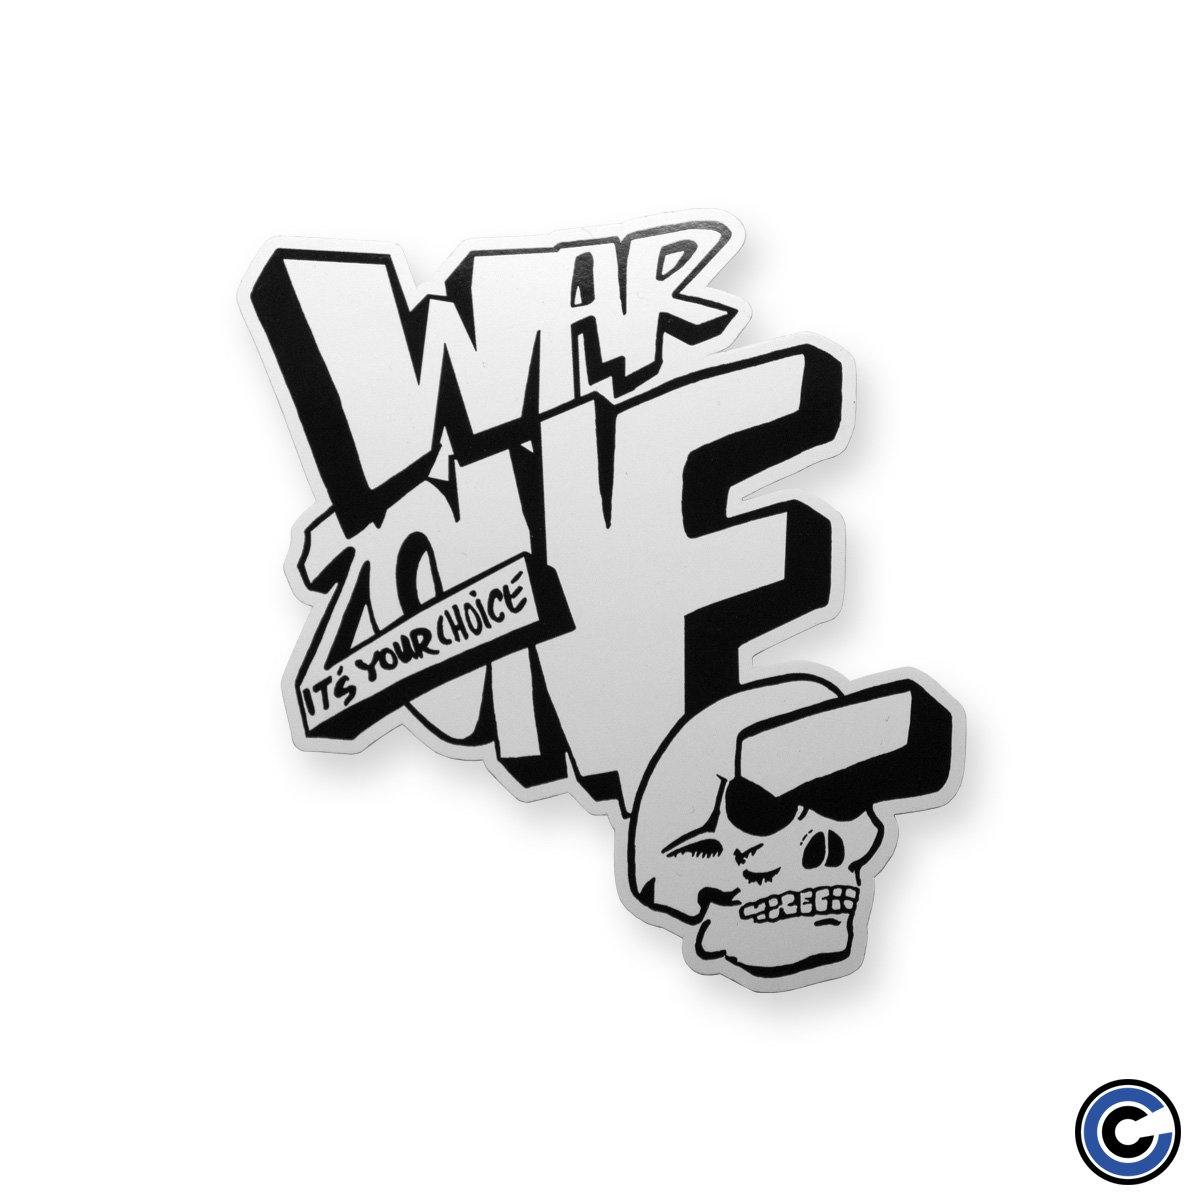 Buy – Warzone "It's Your Choice" Sticker – Band & Music Merch – Cold Cuts Merch